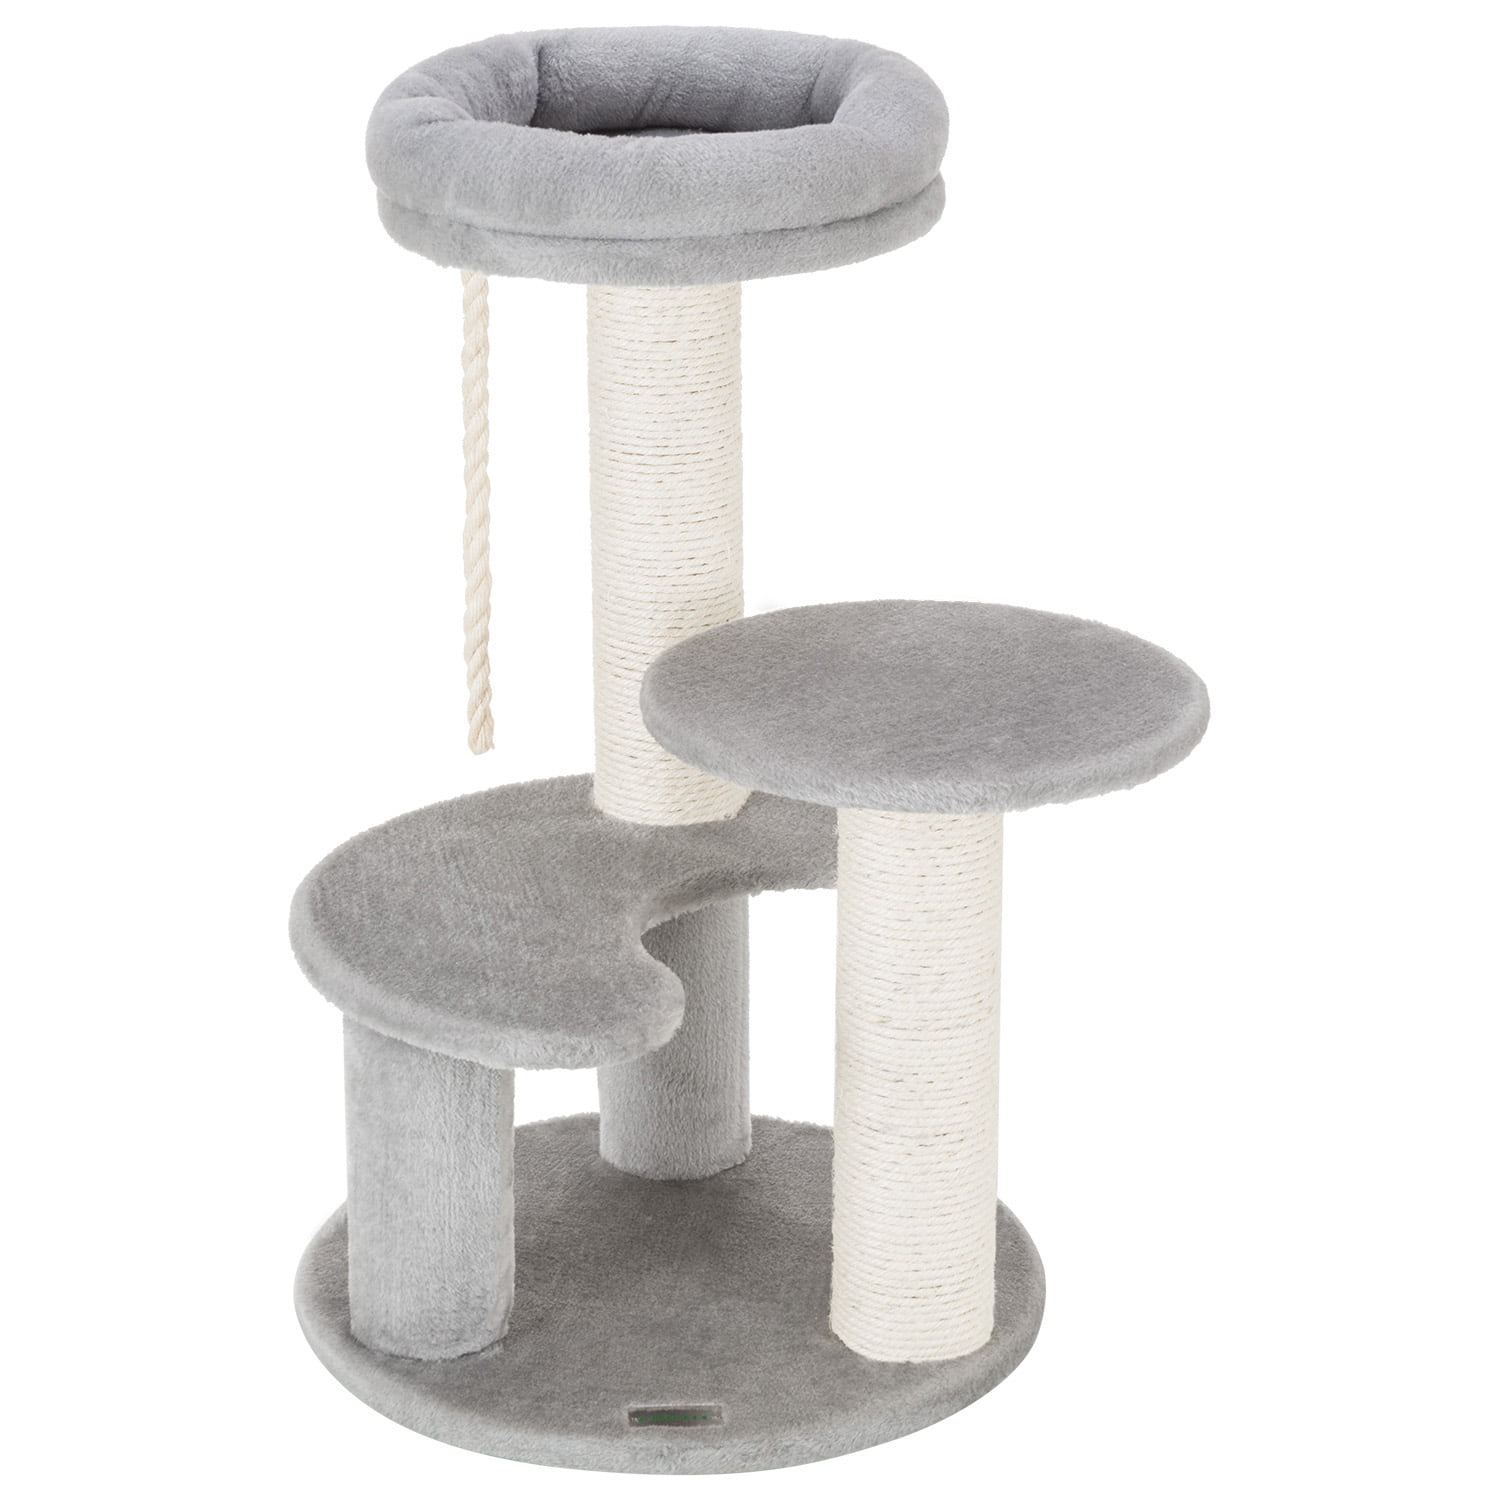 Allieroo Small Cat Tree Condo Playhouse with Ladder Sisal Scratch Posts